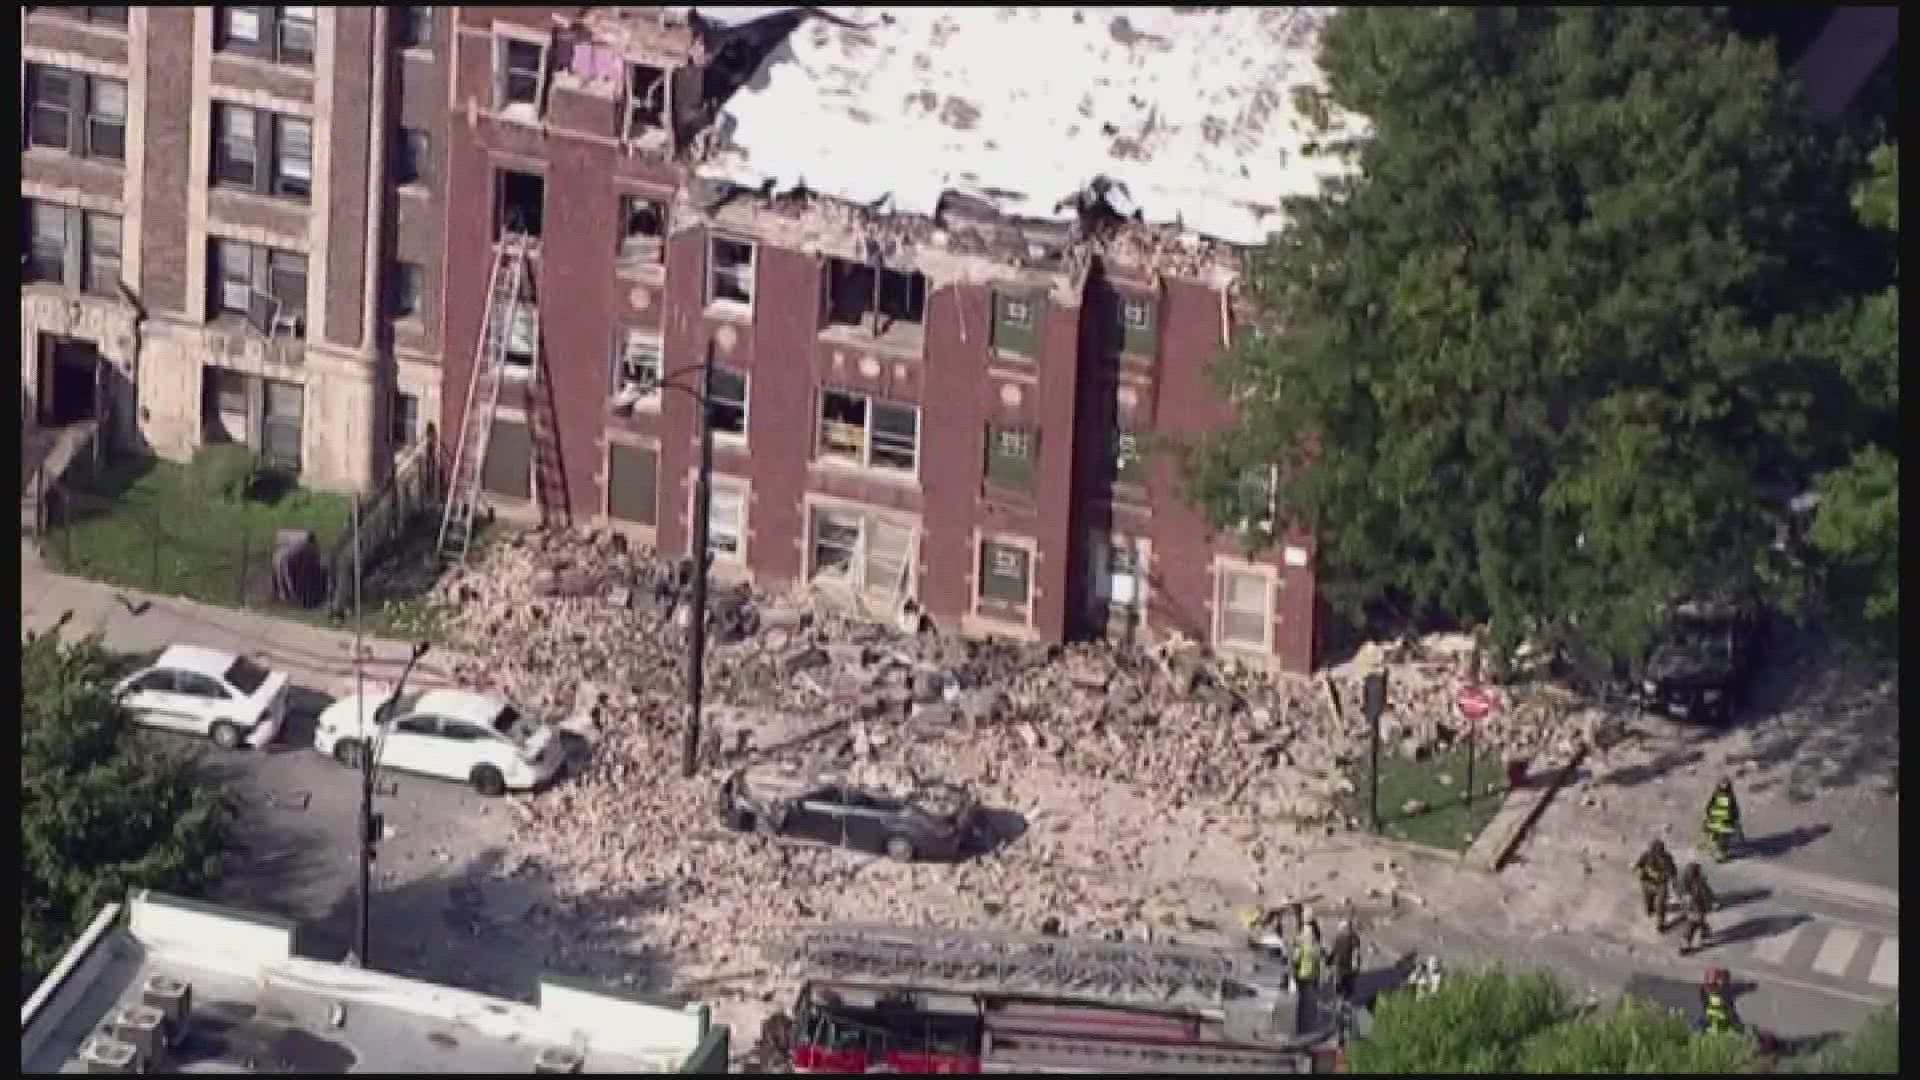 The explosion tore through the top floor of the building, hurting multiple people and even one person from across the street.